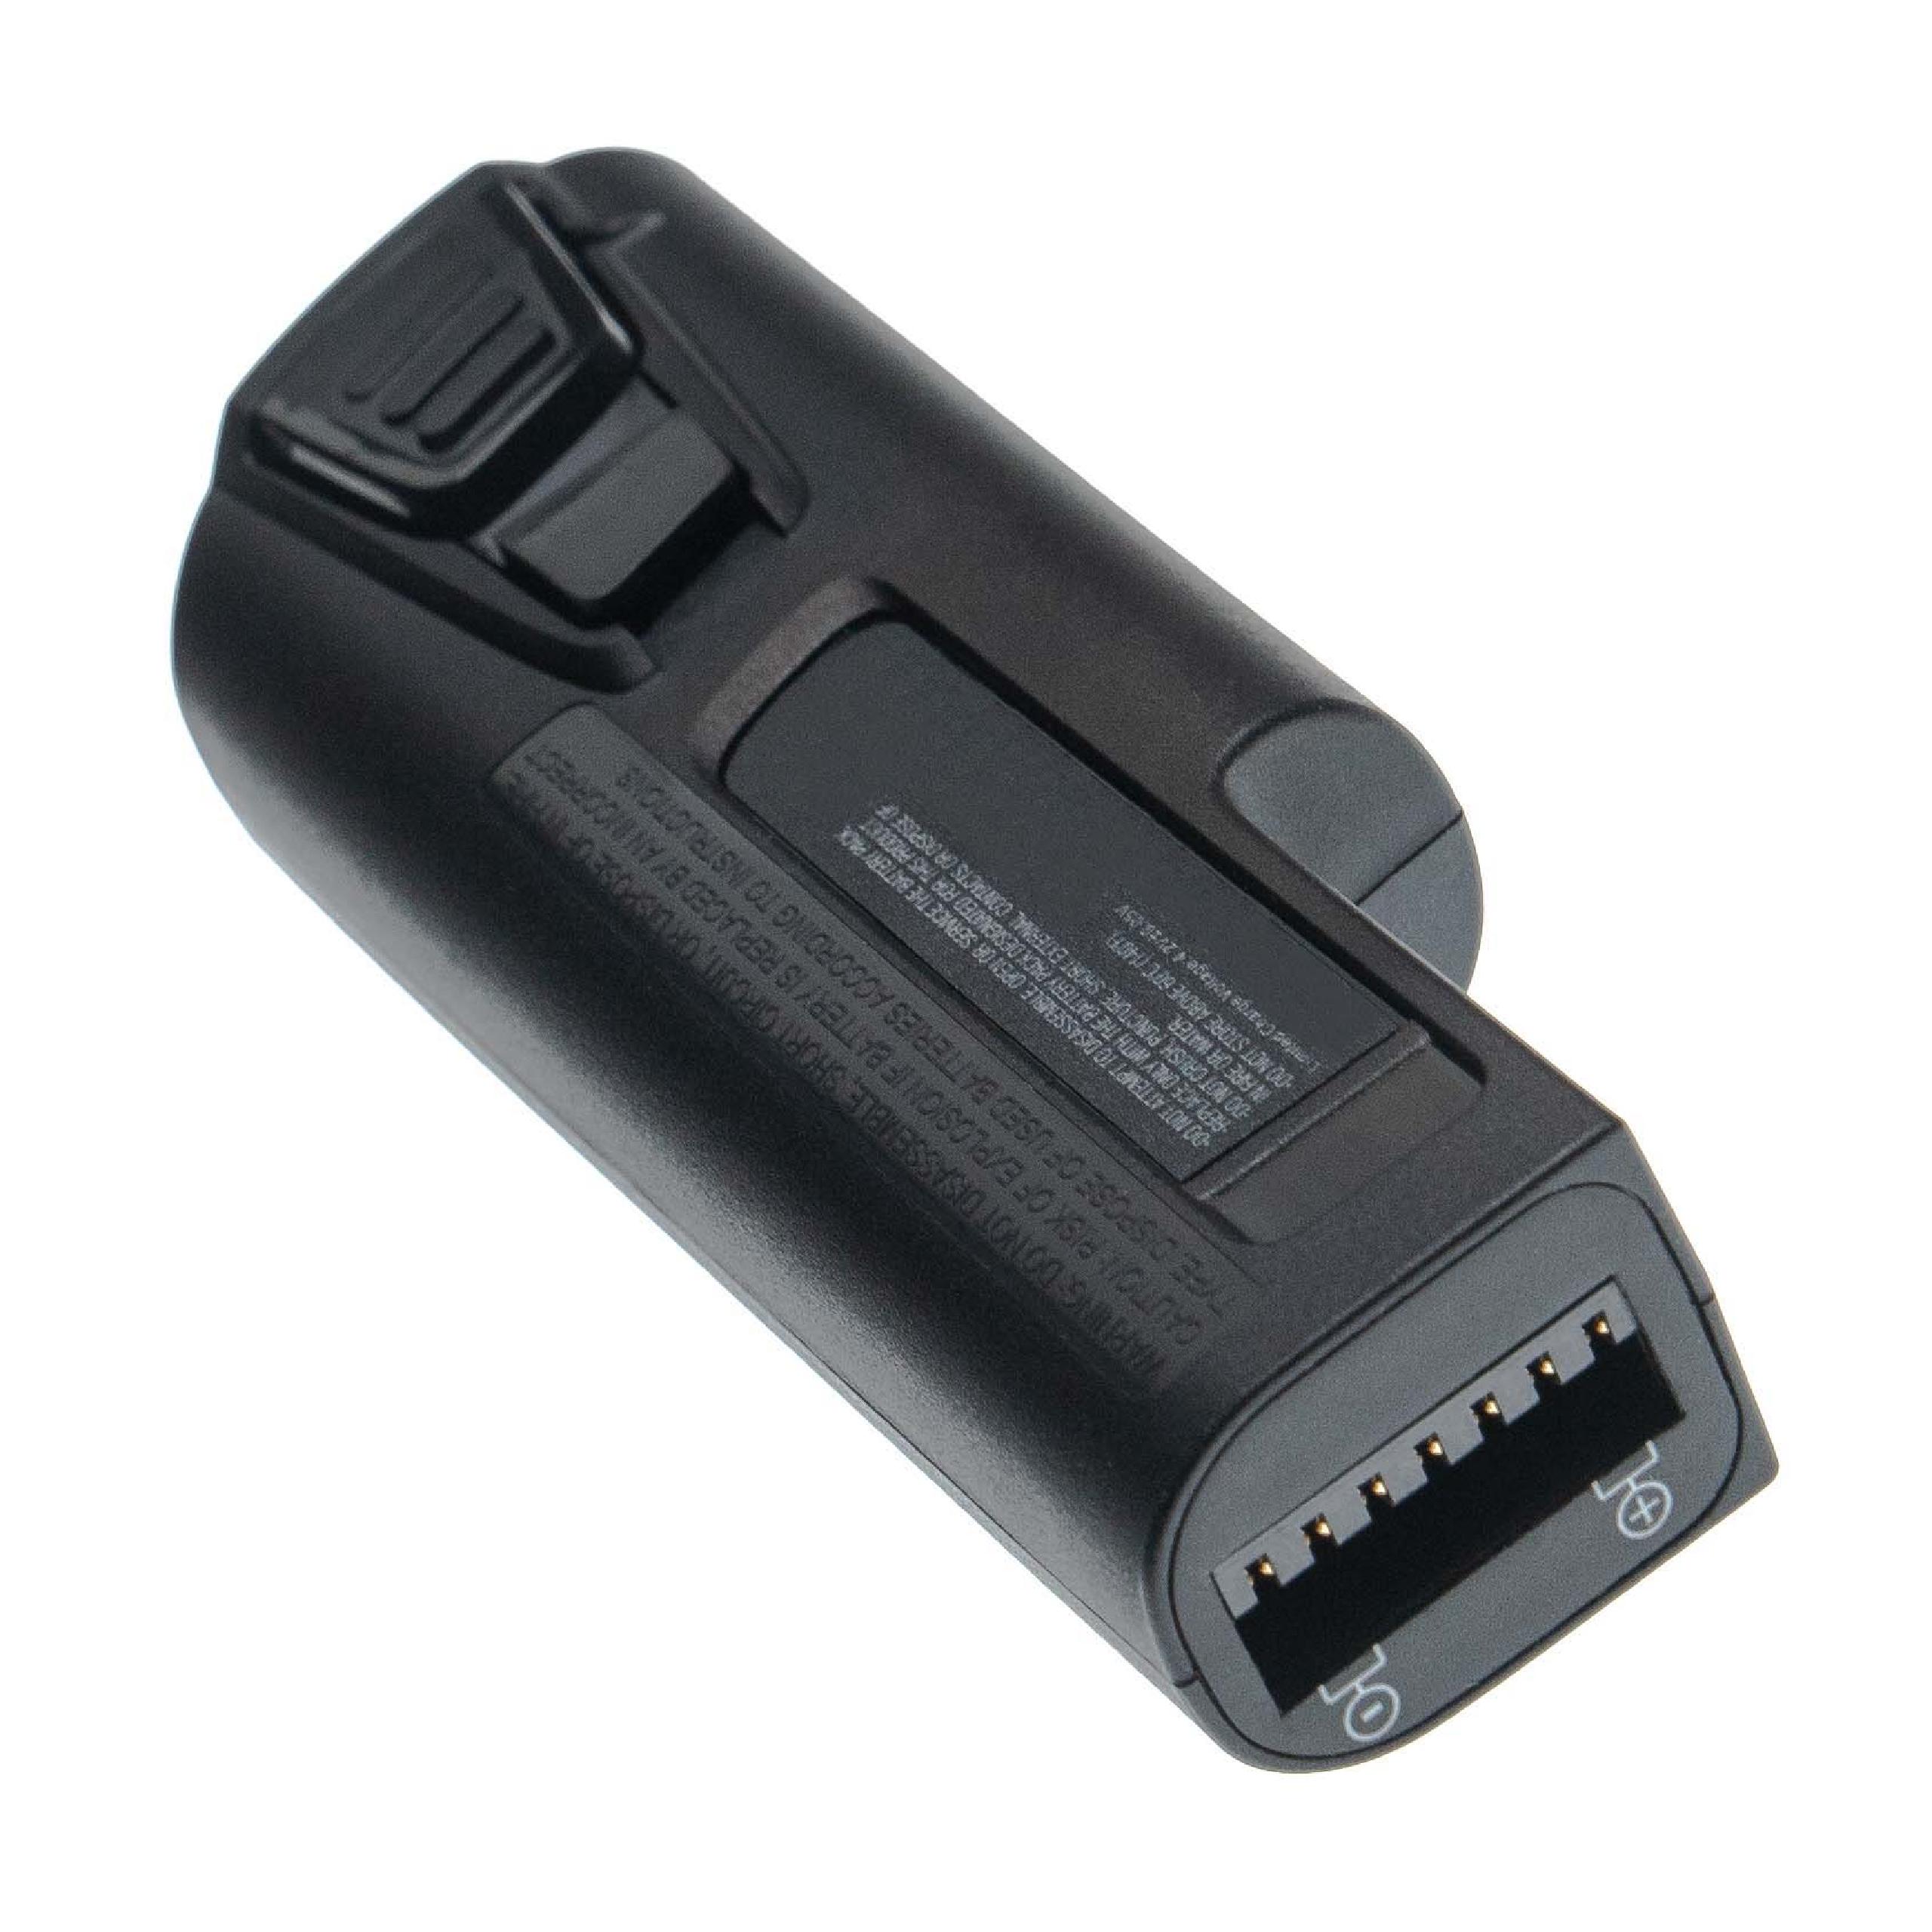 Barcode Scanner POS Battery Replacement for Zebra 82-176054-04, 82-176054-01 - 6400mAh 3.7V Li-Ion